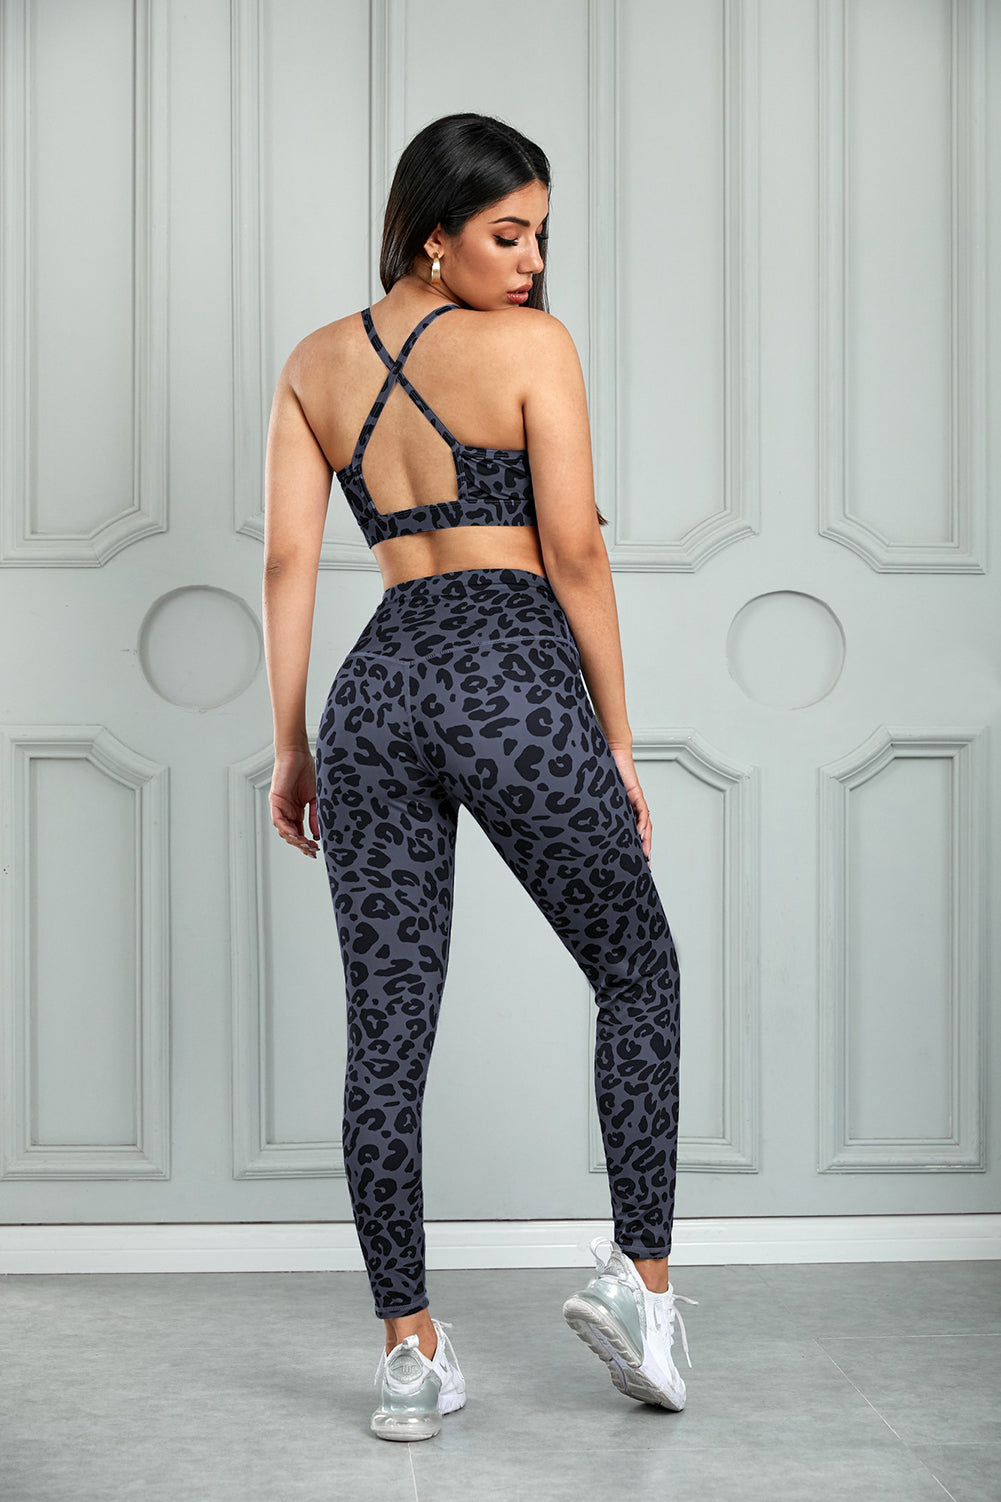 Leopard Sports Bra and Leggings Set - p9nstyle